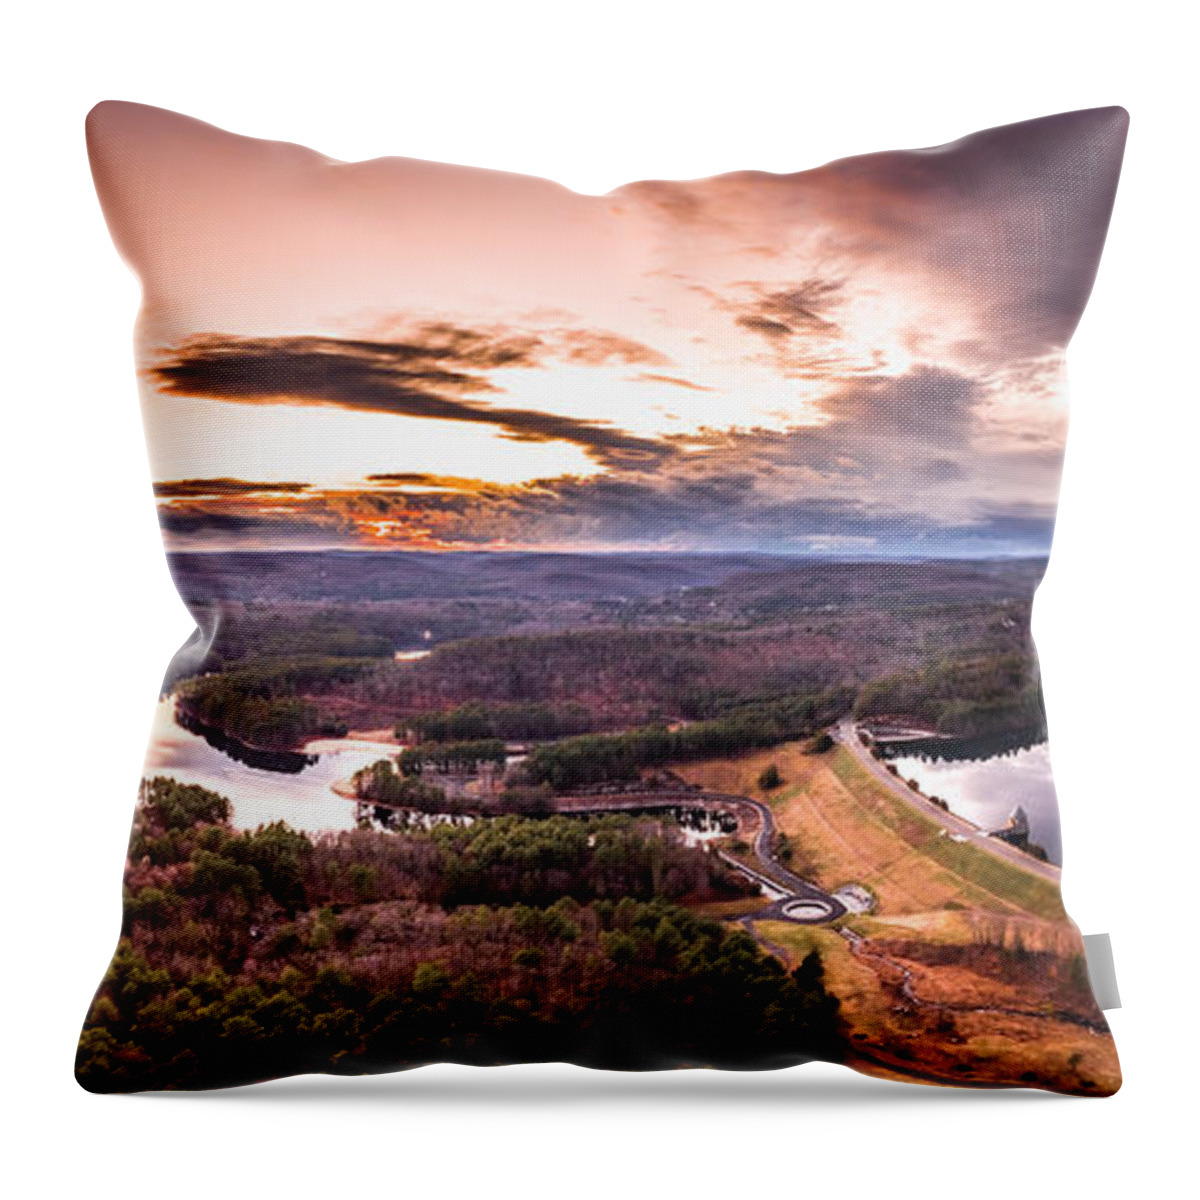 Saville Dam Throw Pillow featuring the photograph Sunset at Saville Dam - Barkhamsted Reservoir Connecticut by Mike Gearin